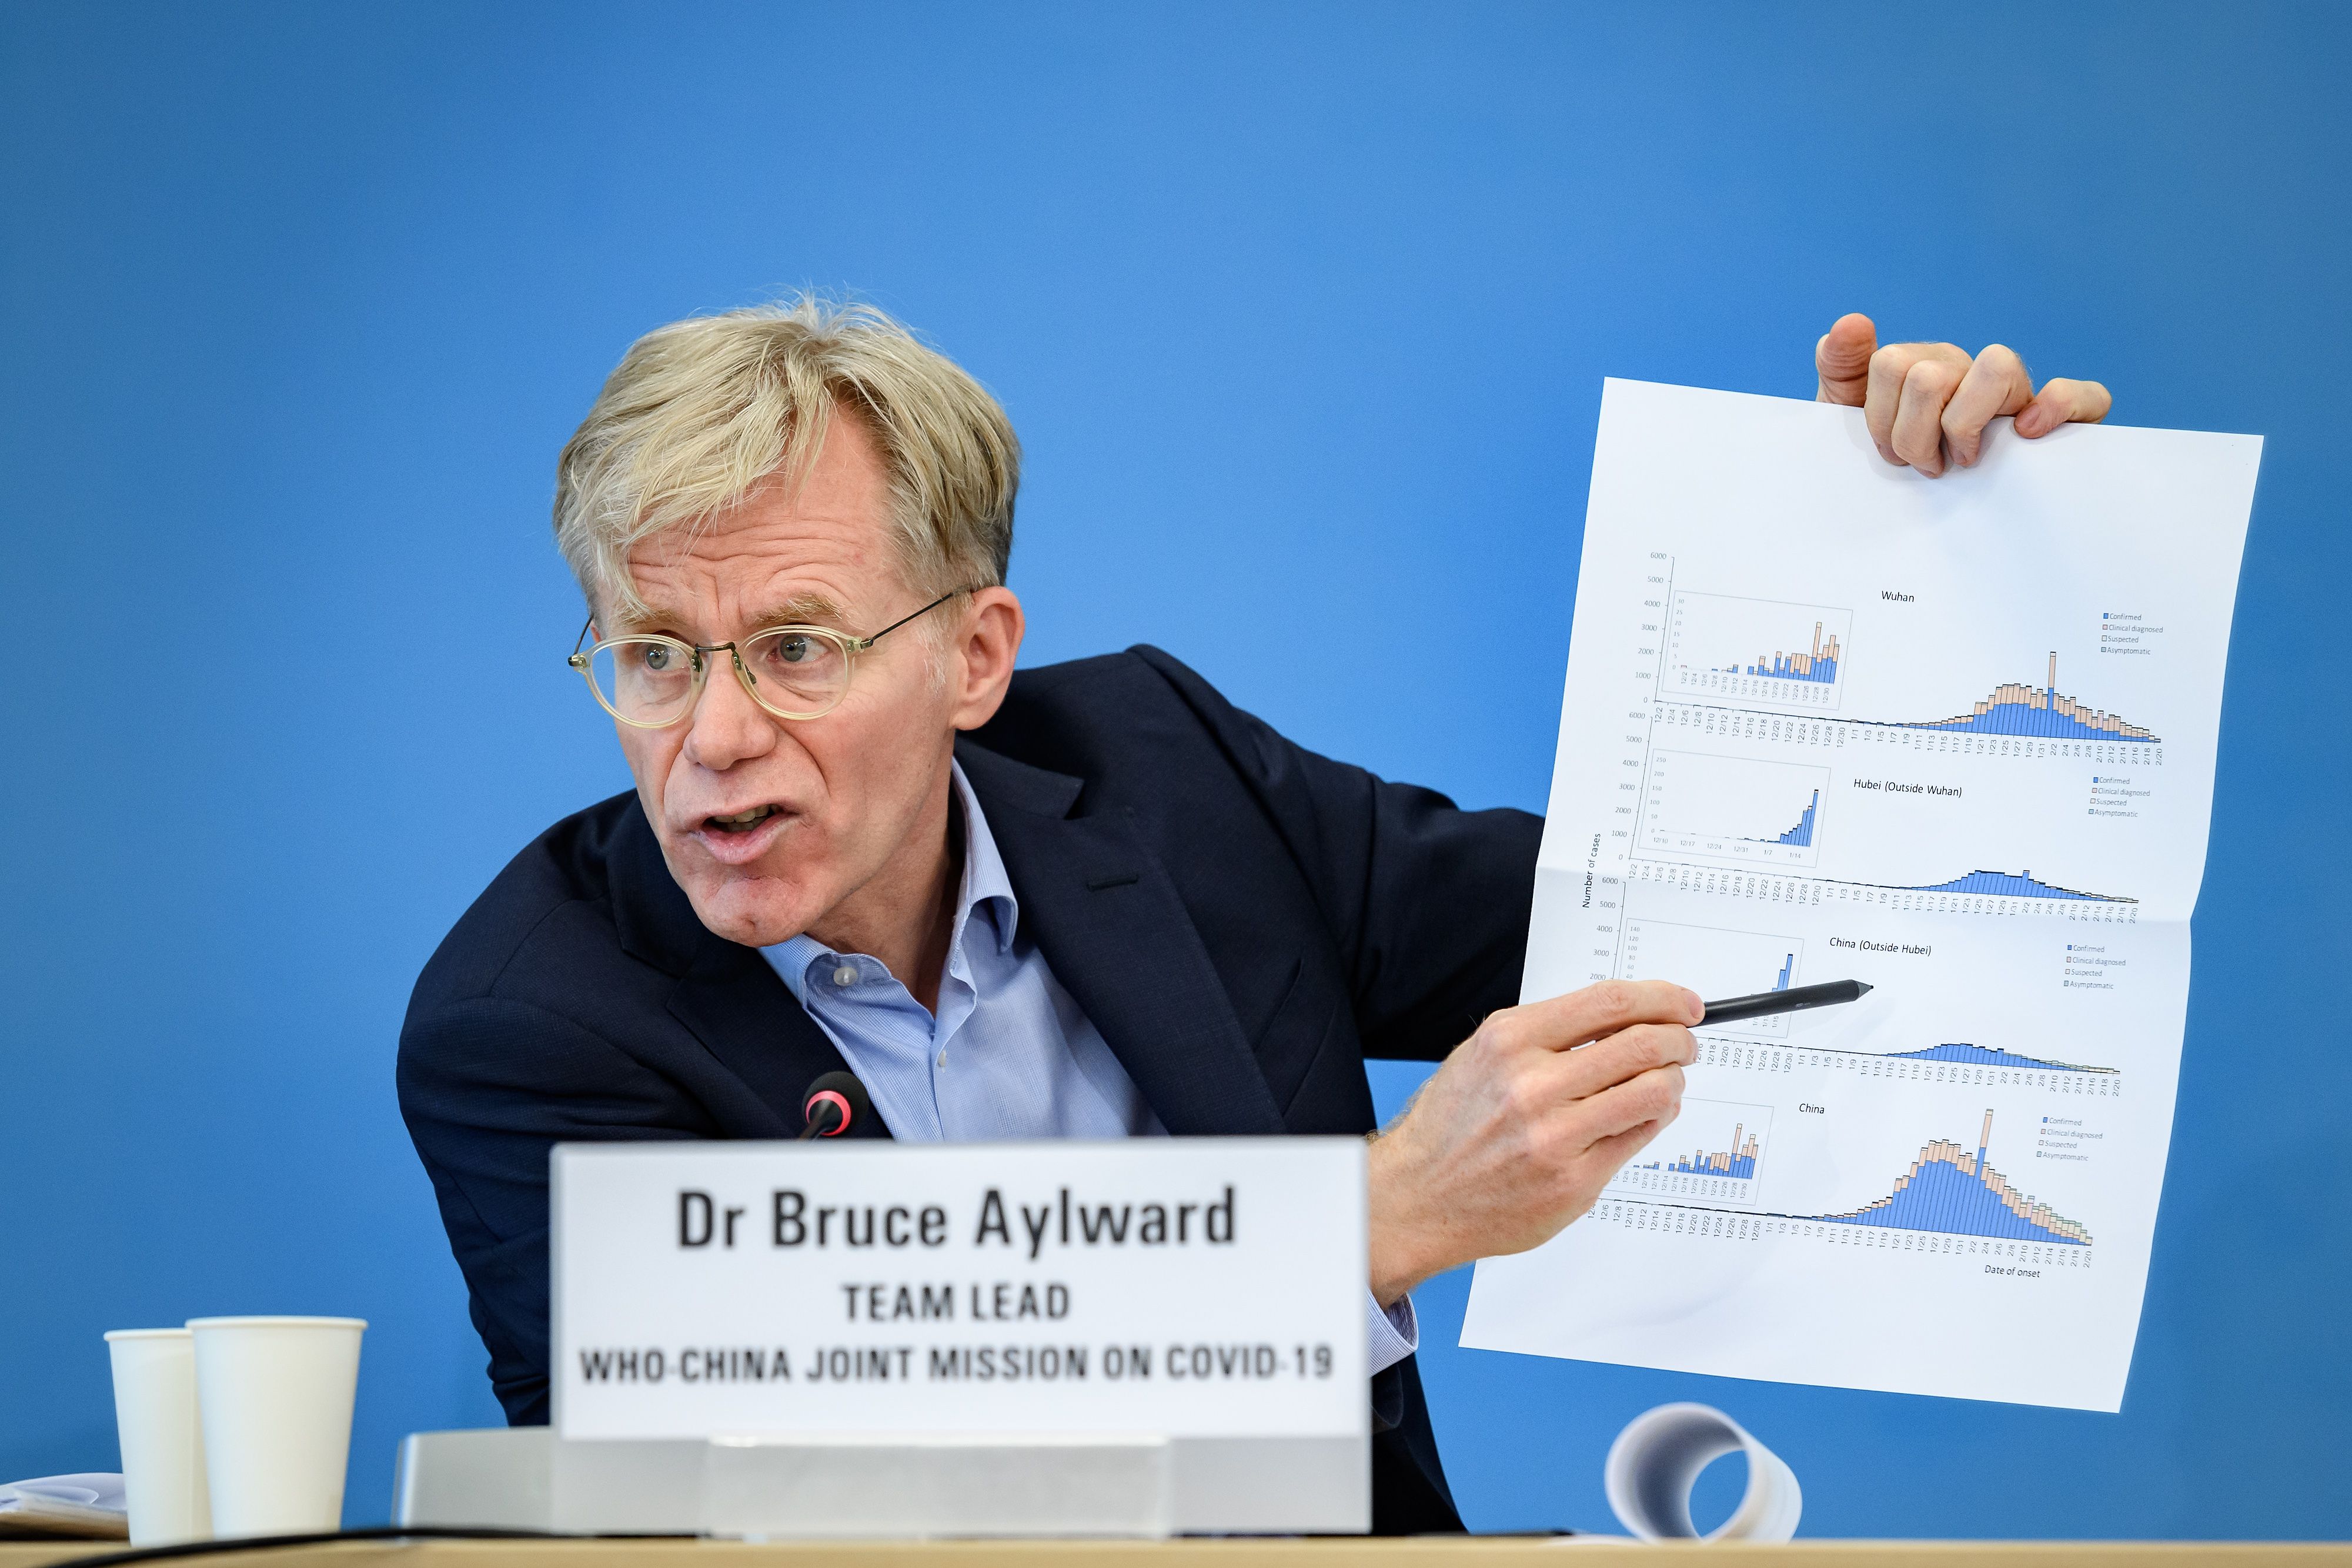 Dr. Bruce Aylward shows graphics related to the coronavirus during a press conference at the WHO headquarters in Geneva on Tuesday, February 25.